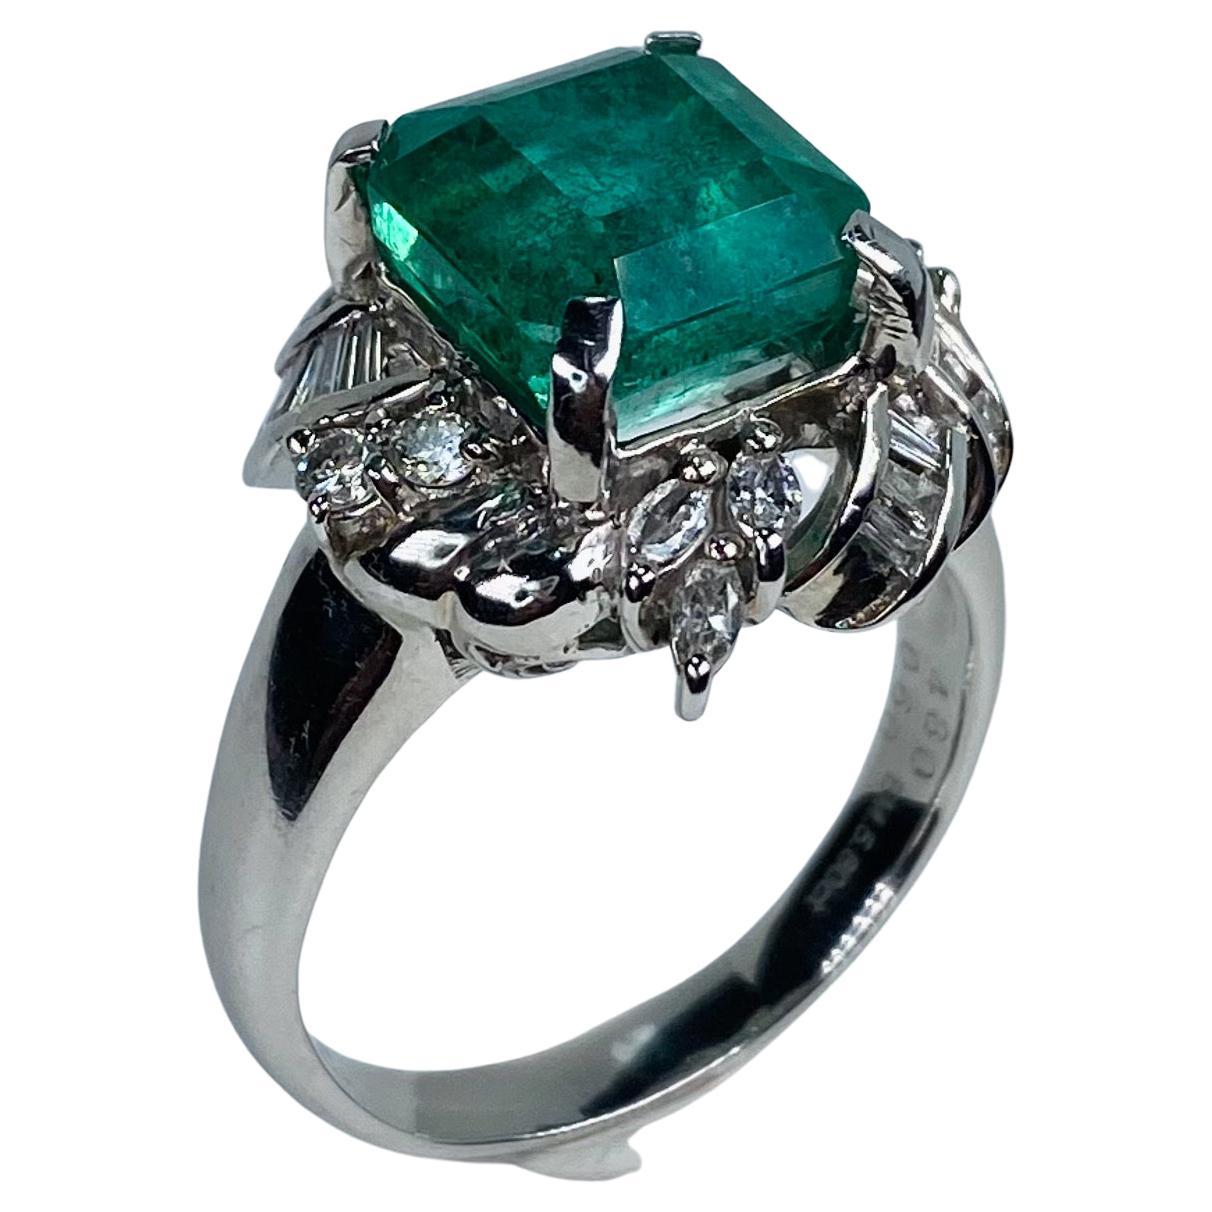 5.80ct Zambian Emerald Ring For Sale